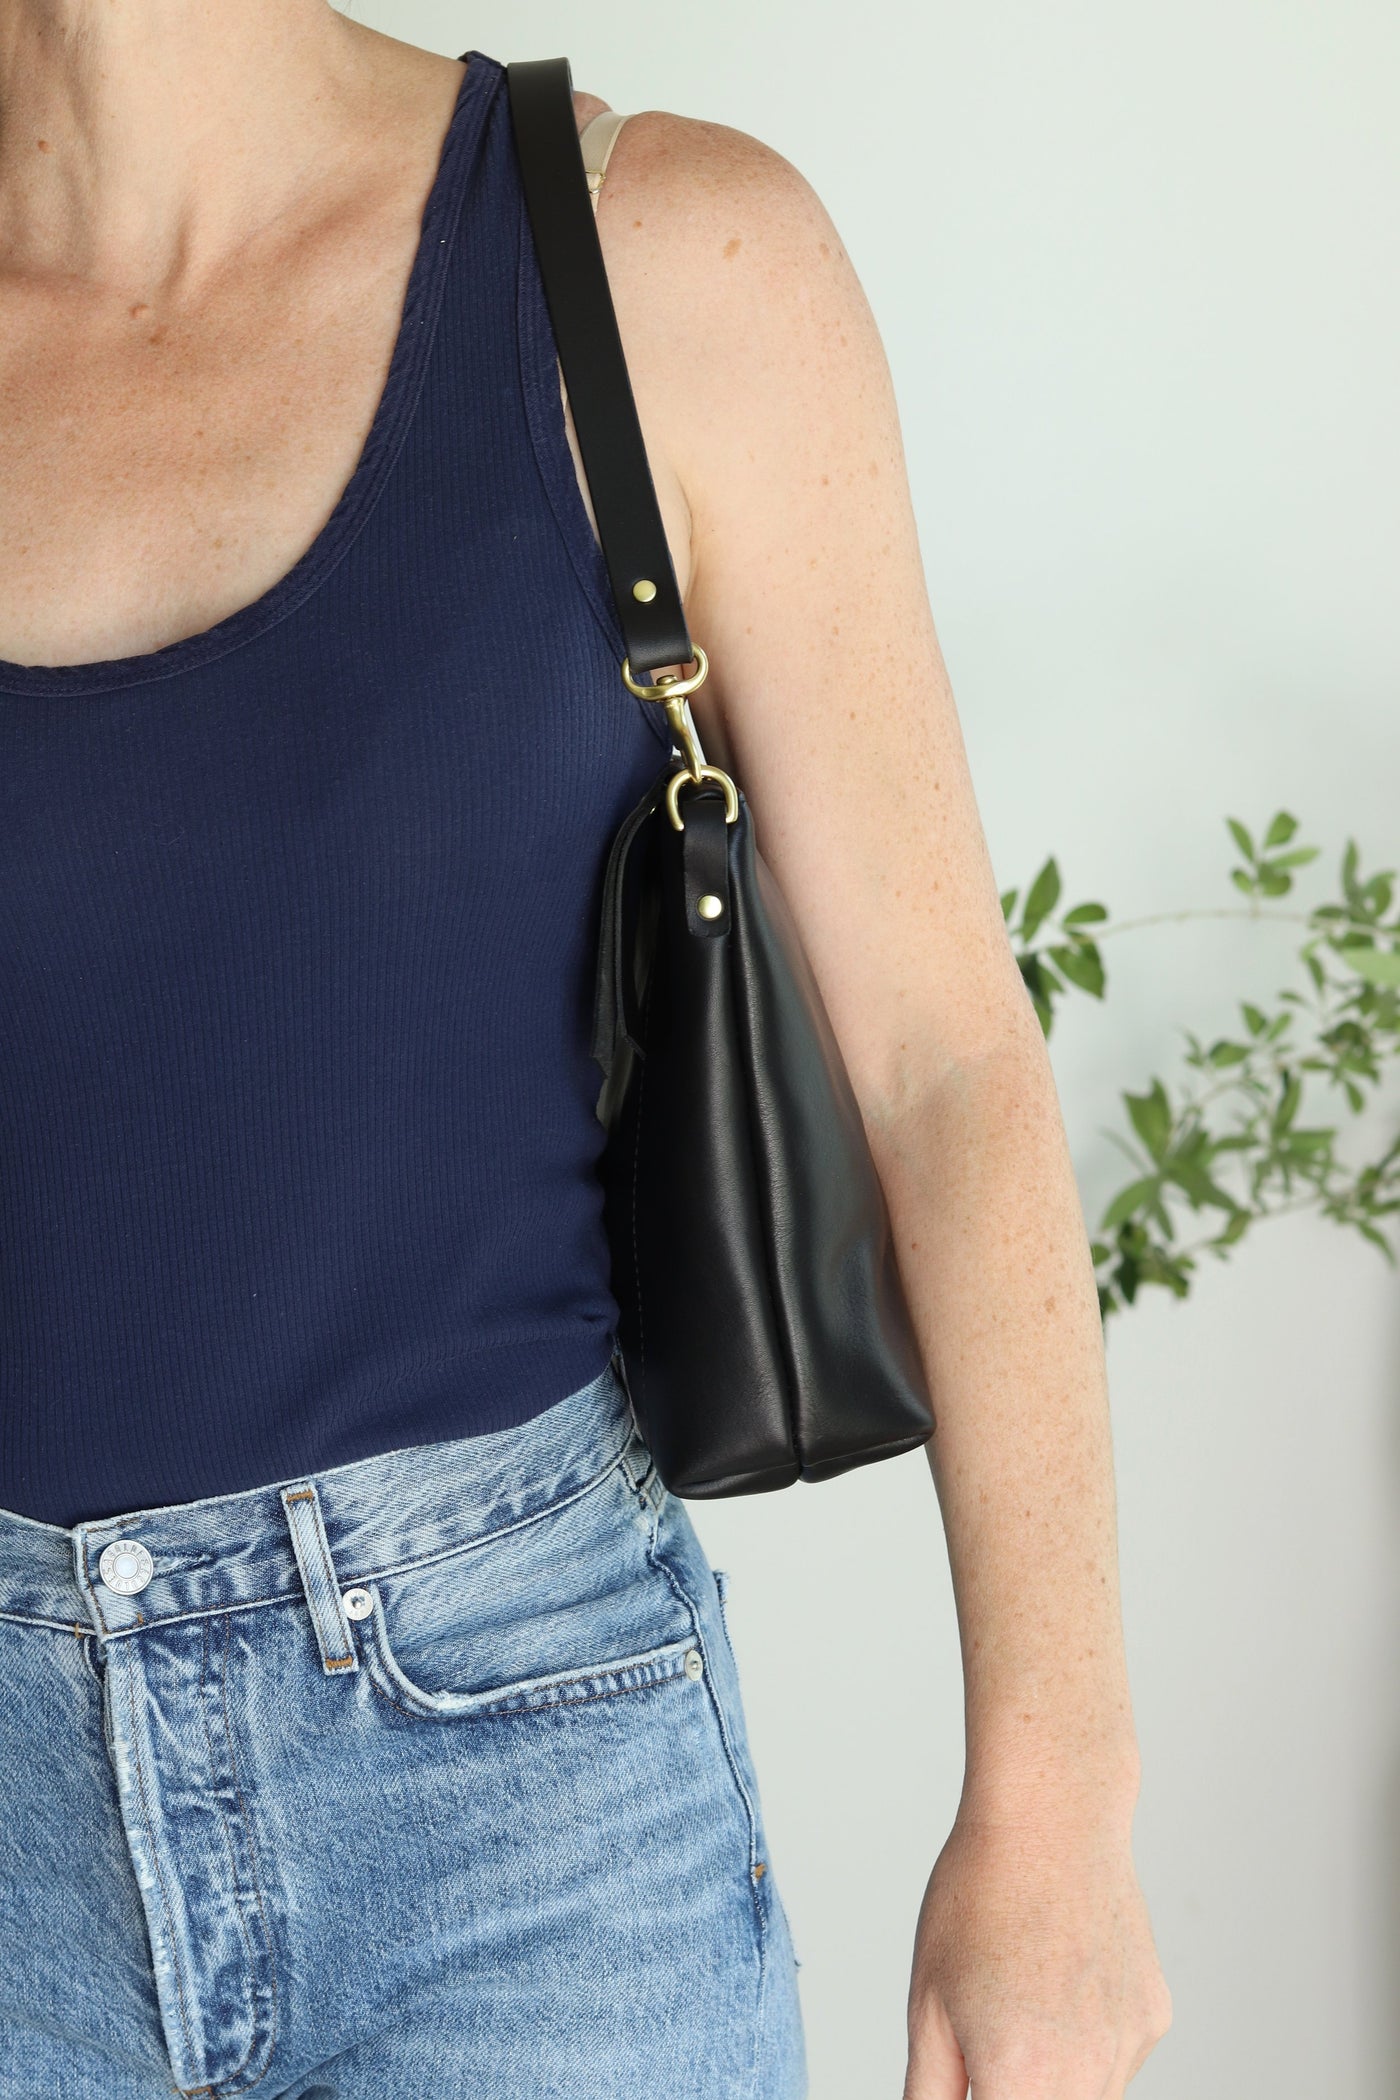 Short Shoulder Strap or Handle - 20 (inch) Length - 0.75 (inch) Wide - Leather Purse/Bag Strap - Choose Leather and Connector Style